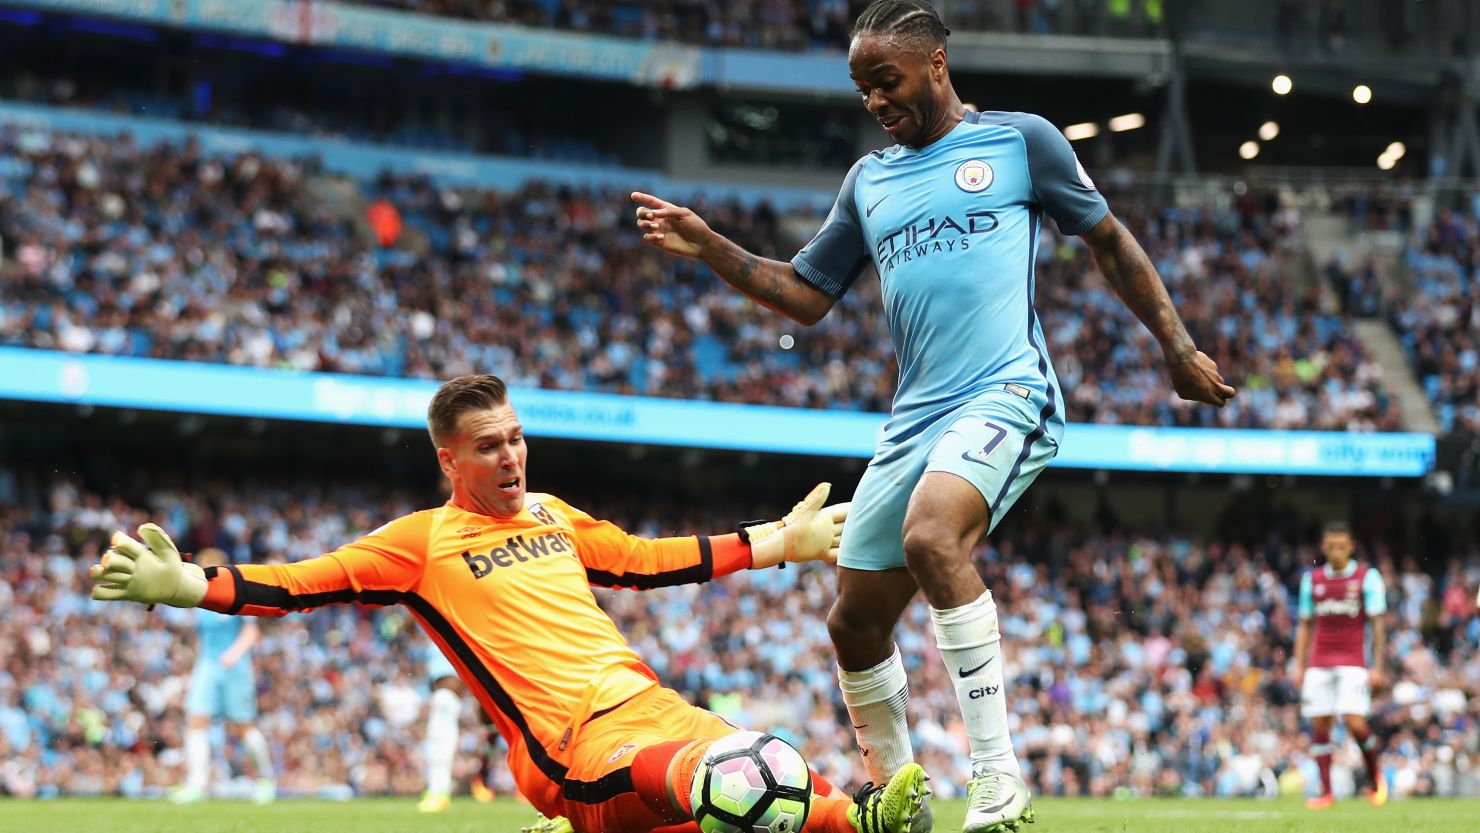 Manchester City's Raheem Sterling rounds West Ham goalkeeper Adrian to score his second goal.